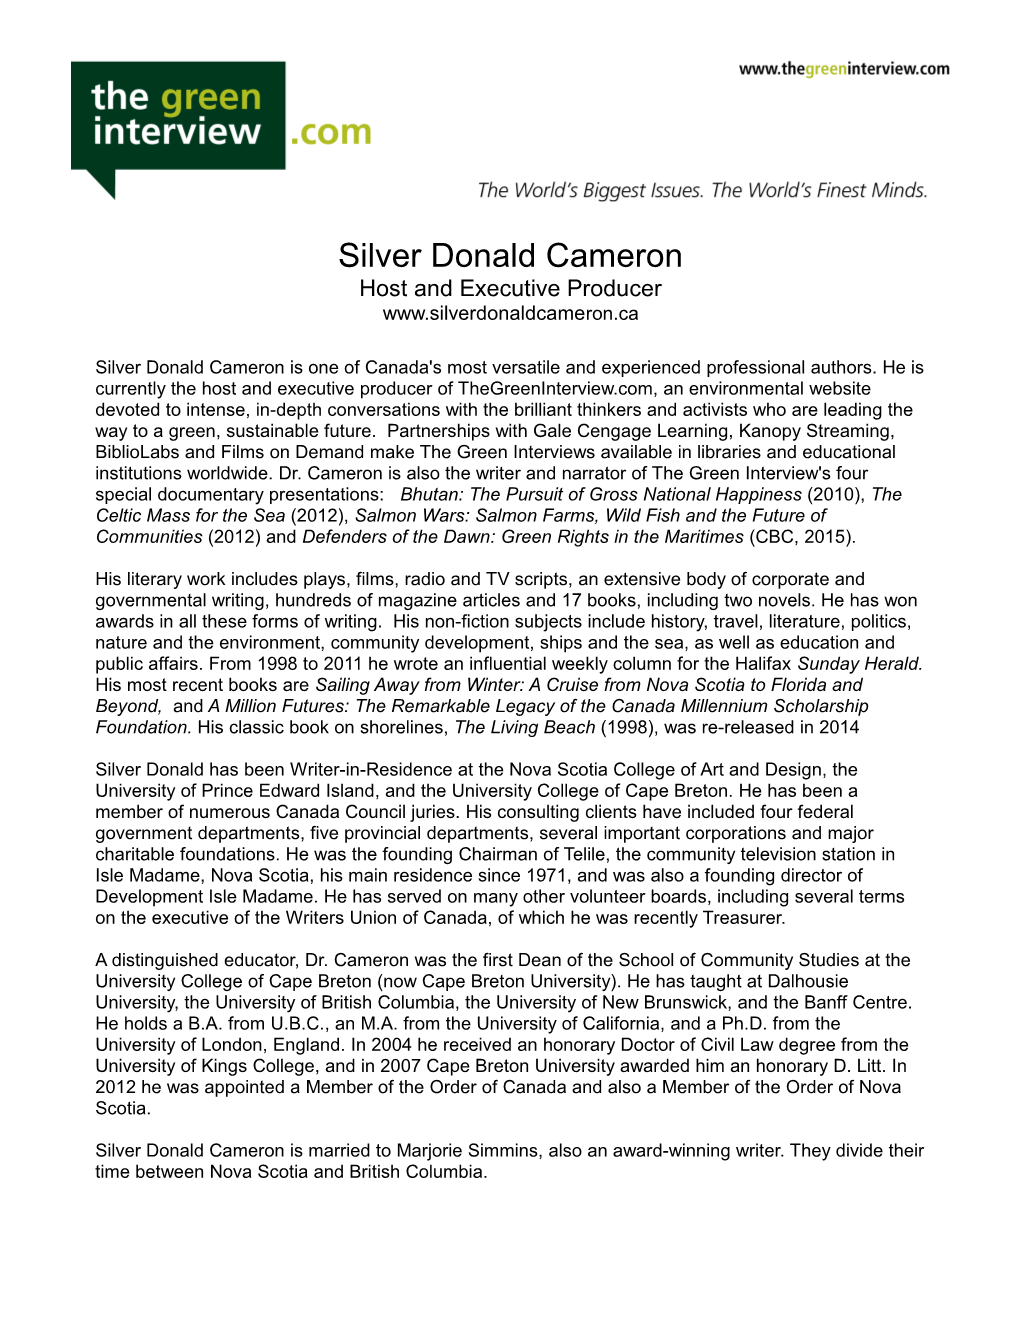 Silver Donald Cameron: the Green Interview